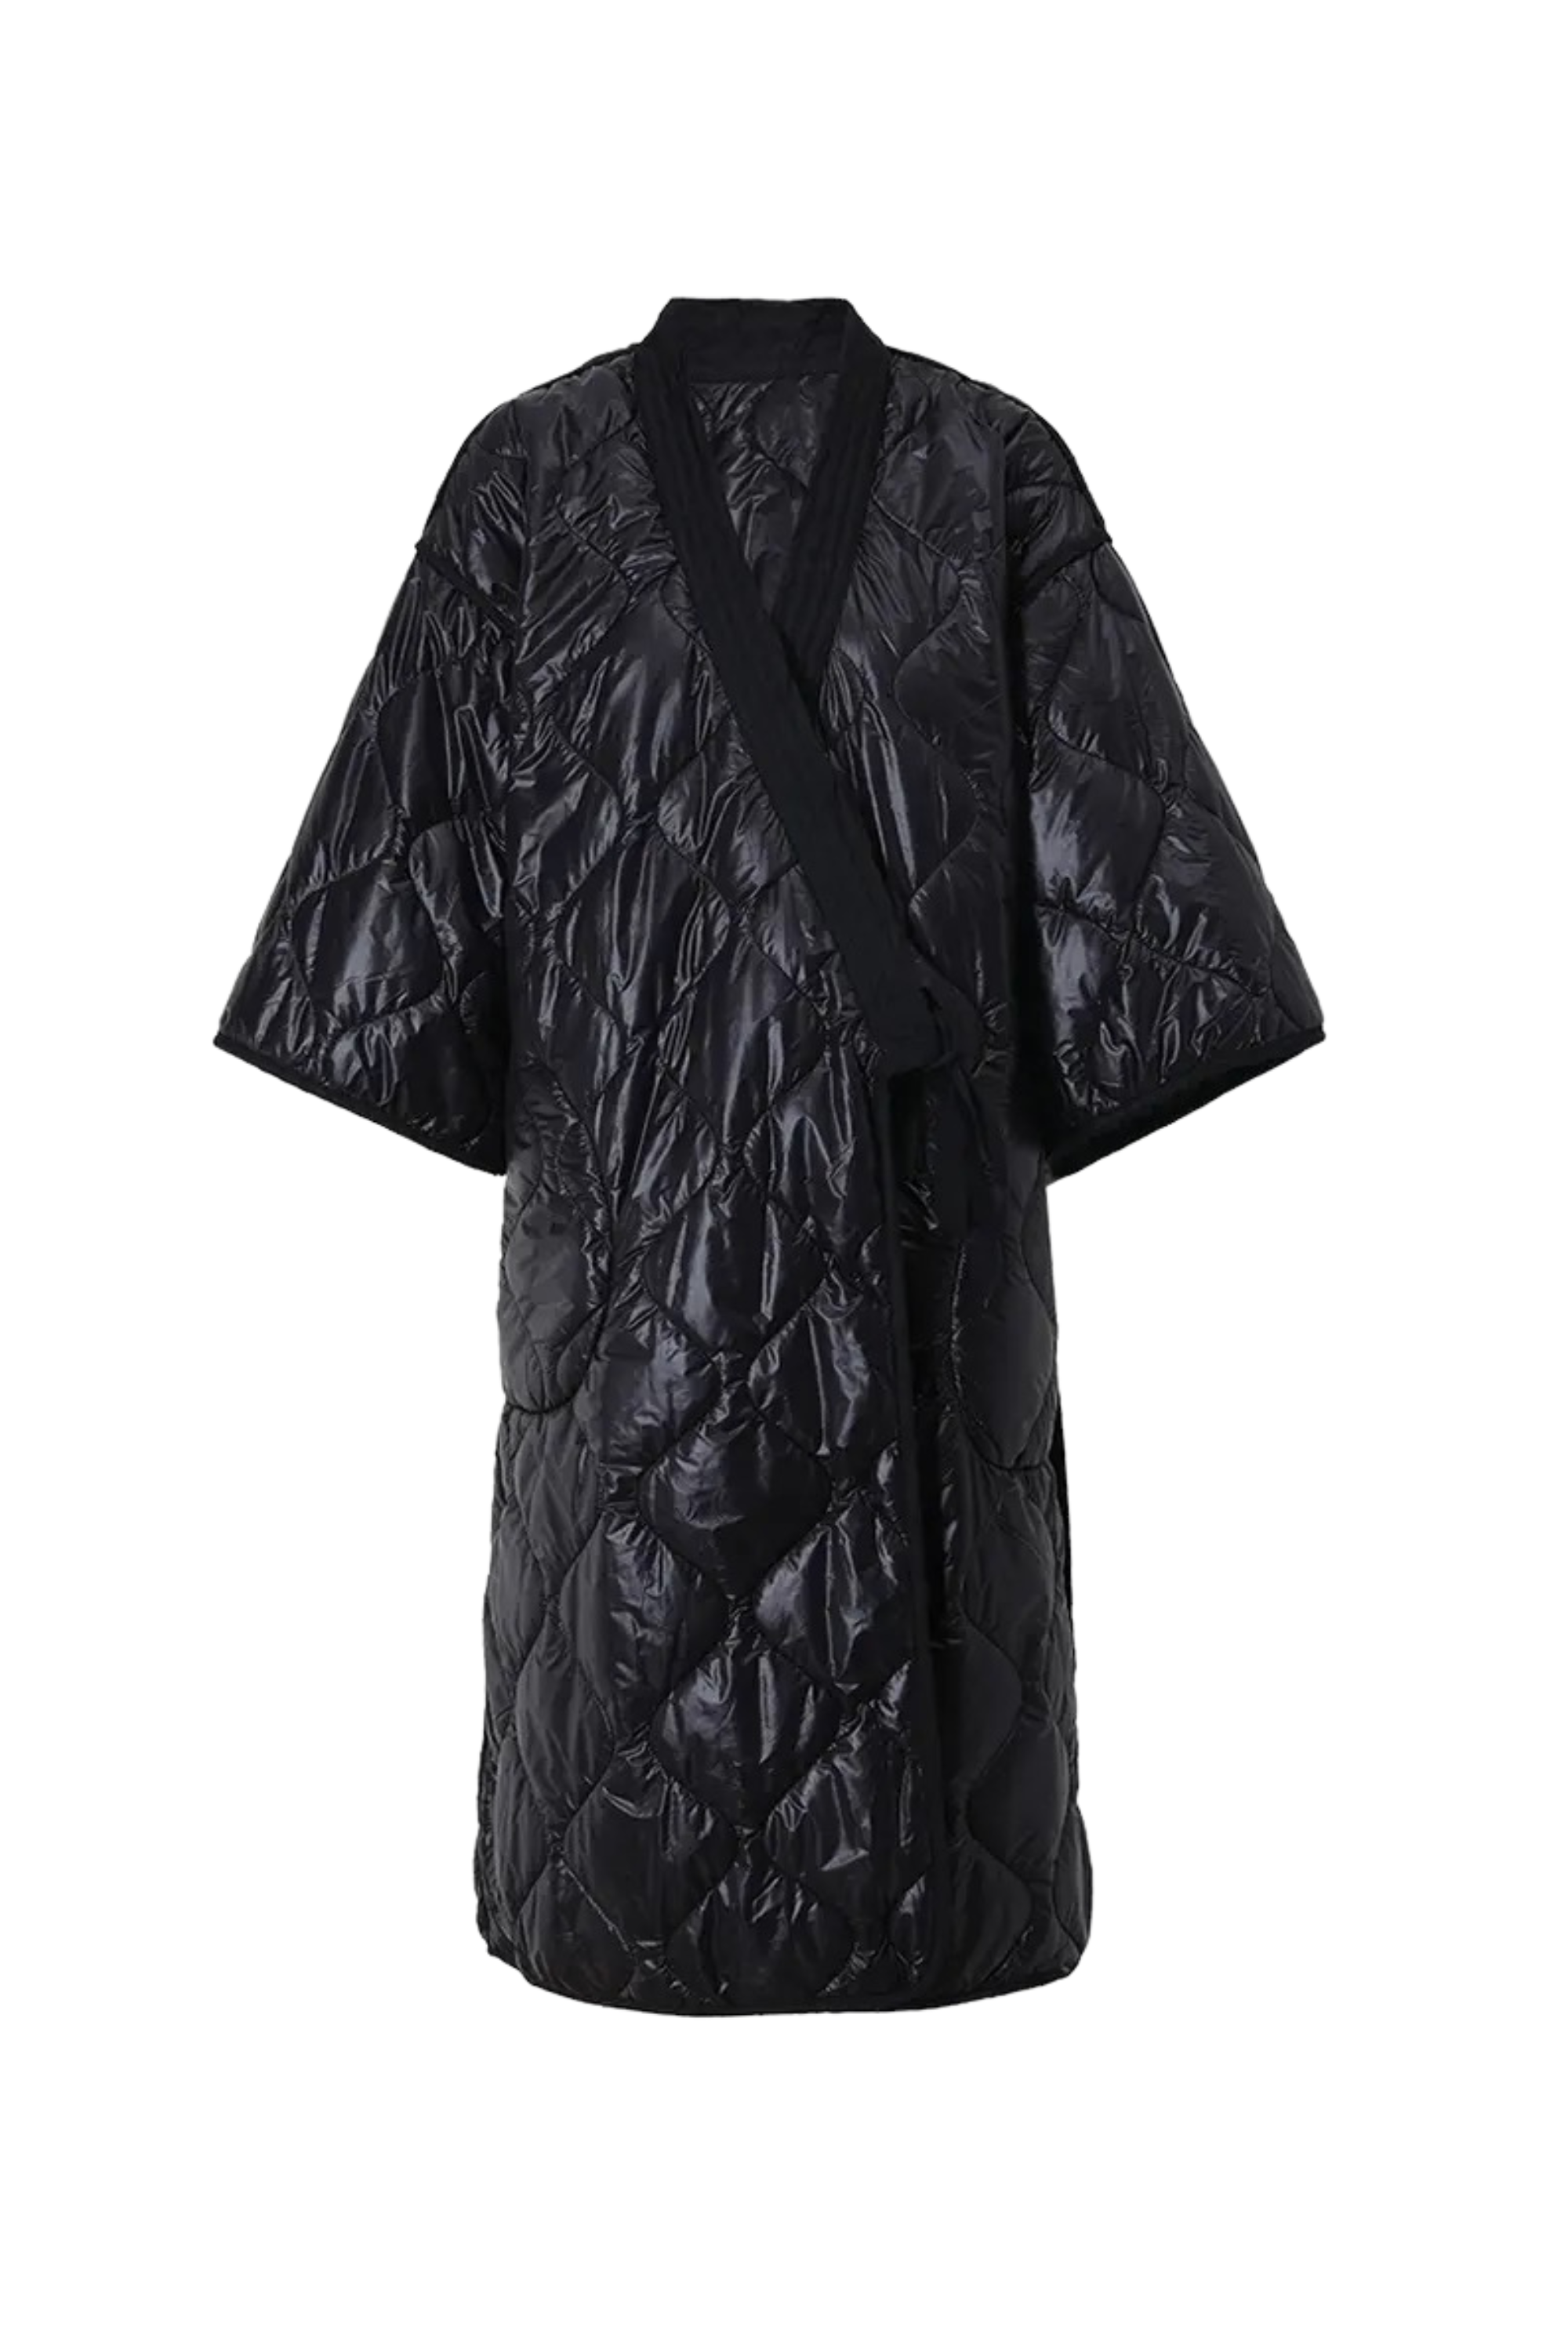 GOLDxTEAL black quilted kimono coat.